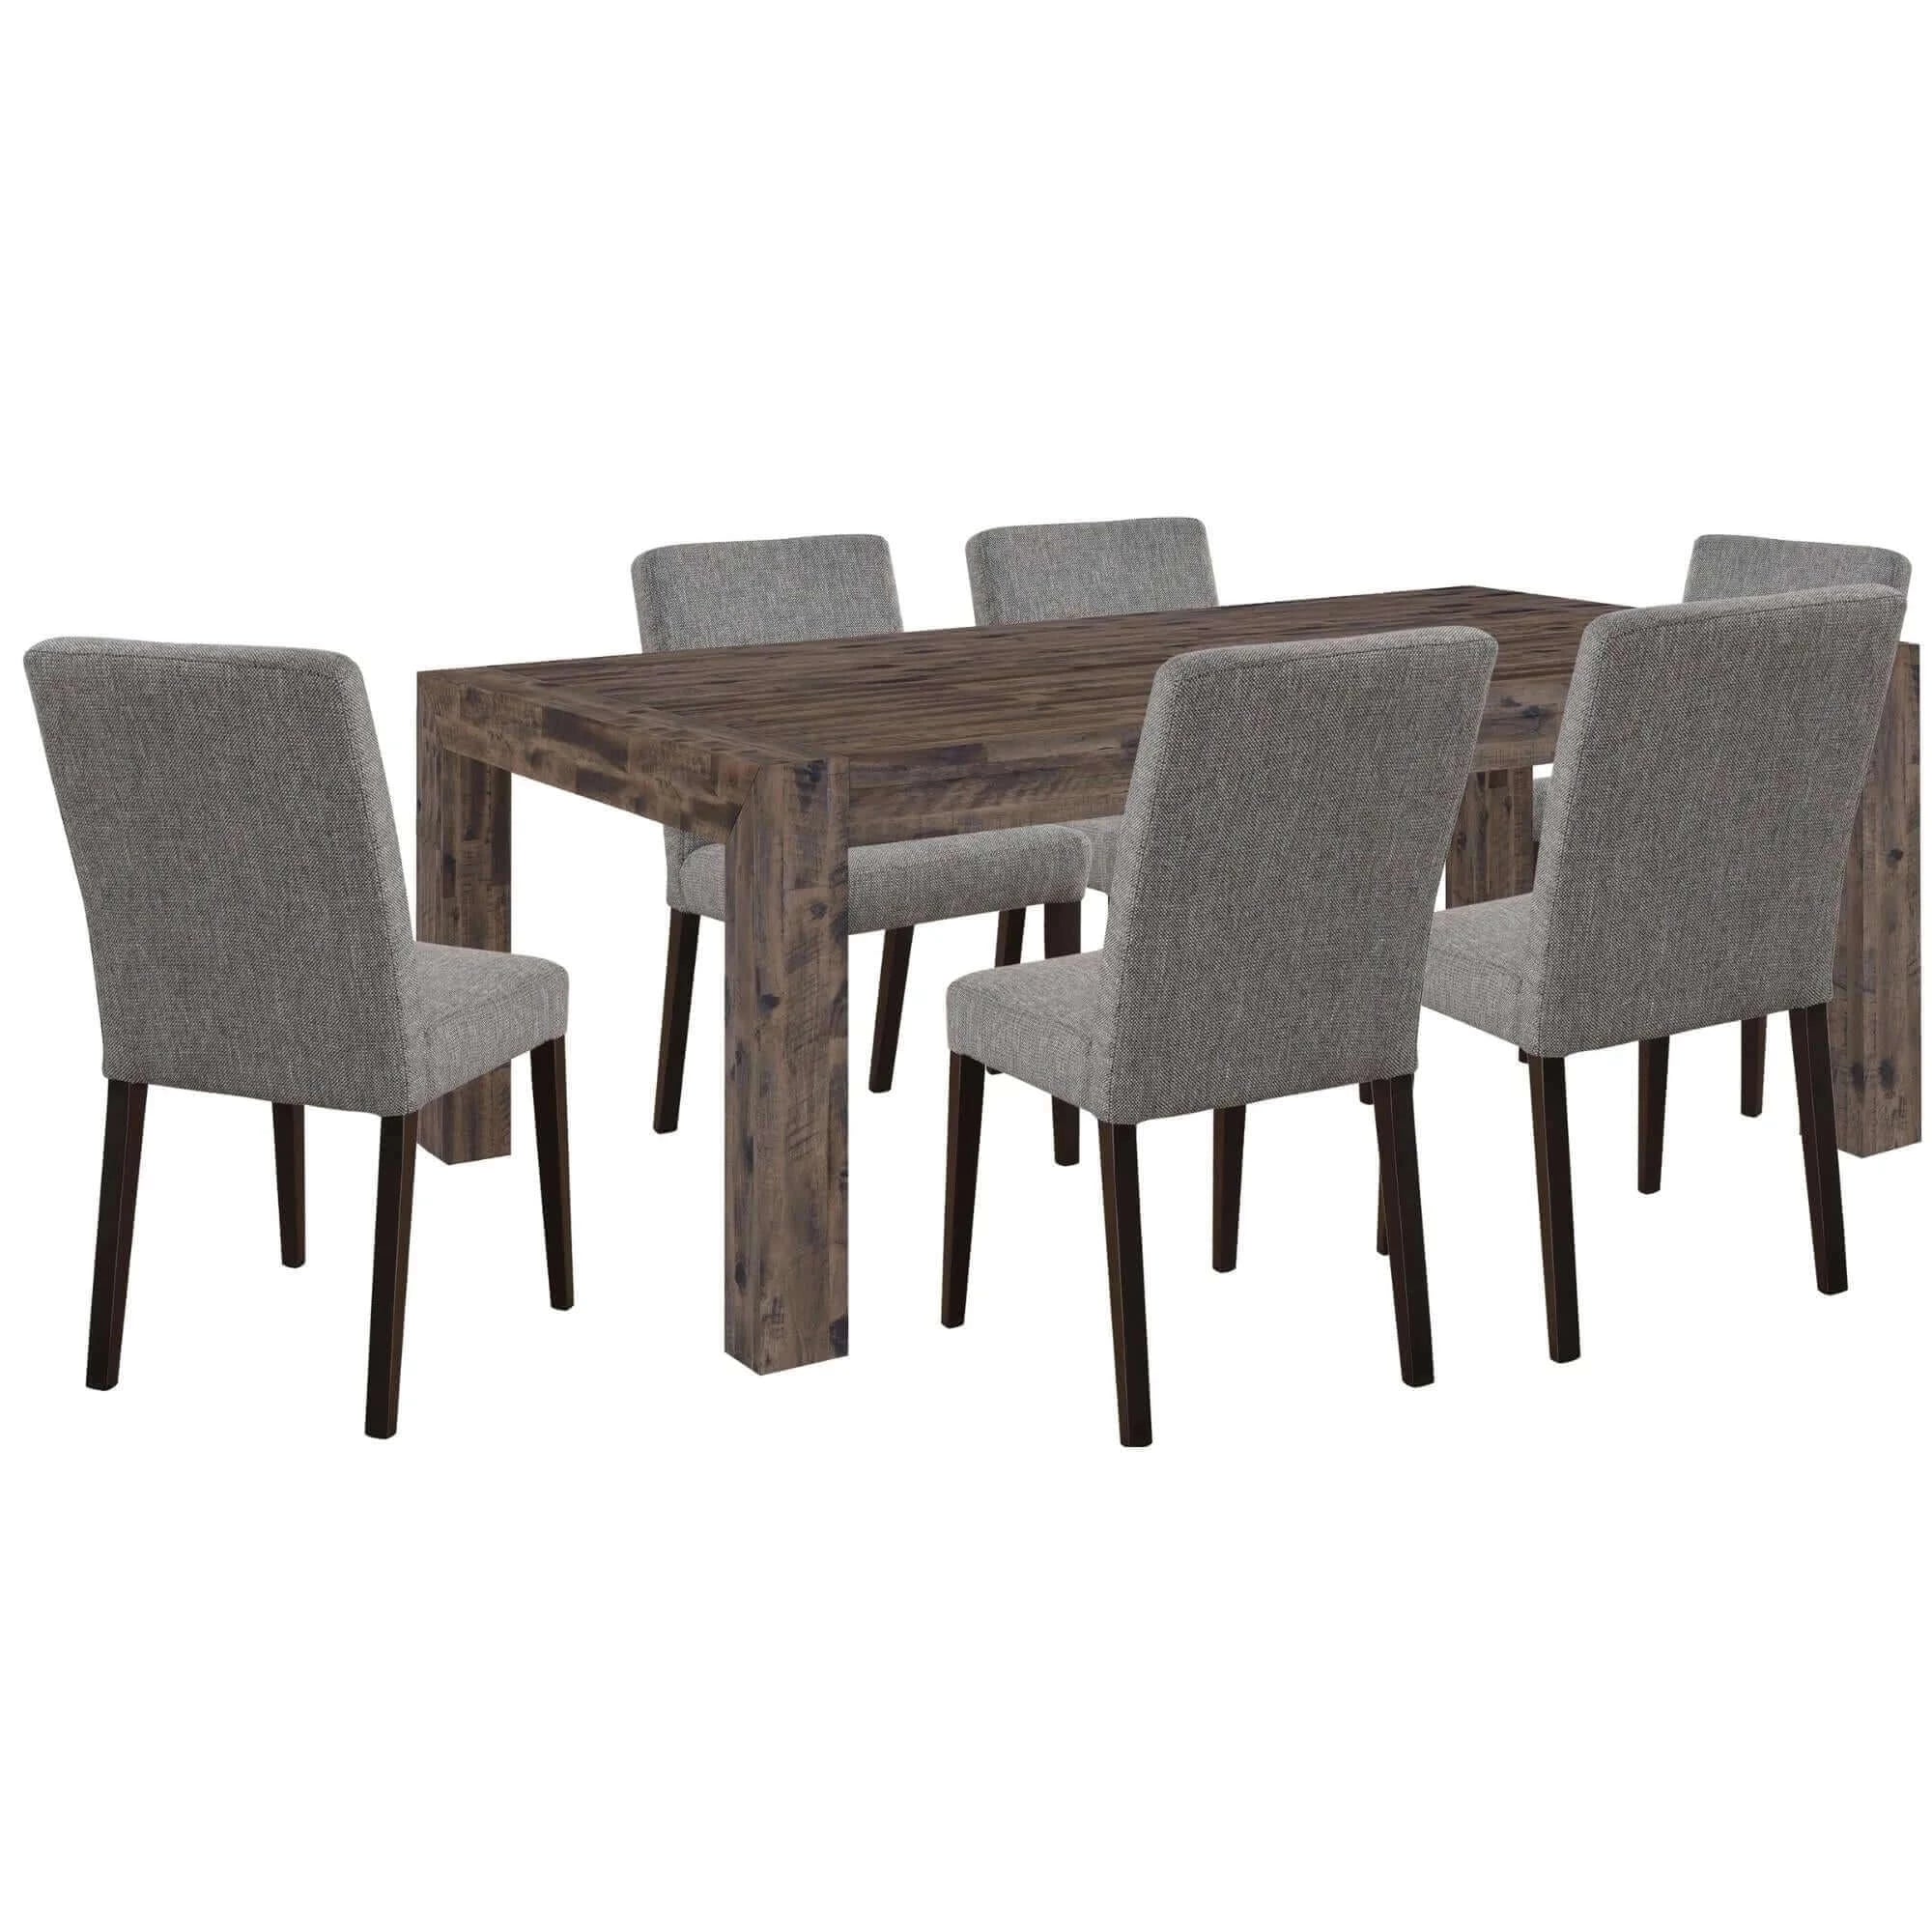 Buy catmint 7pc dining set 180cm table with 6 solid wood fabric chair - upinteriors-Upinteriors